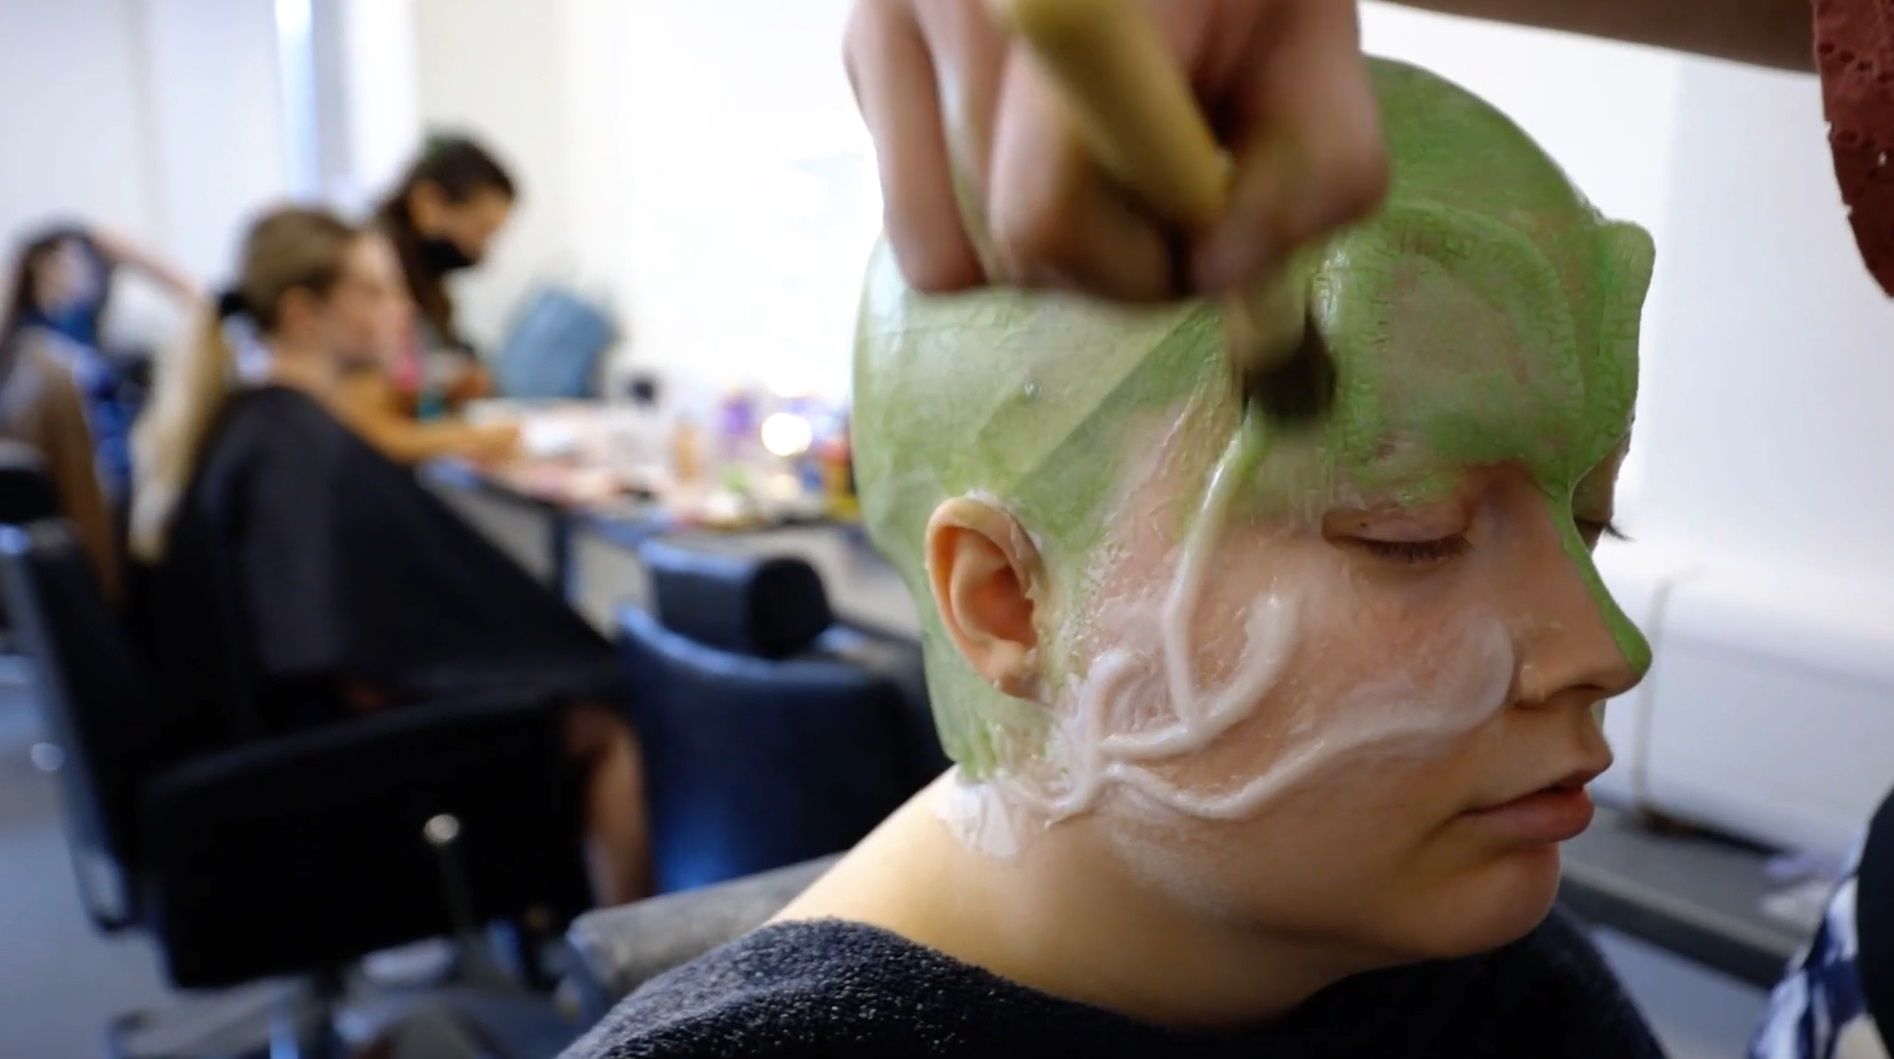 Student wearing green prosthetics on face